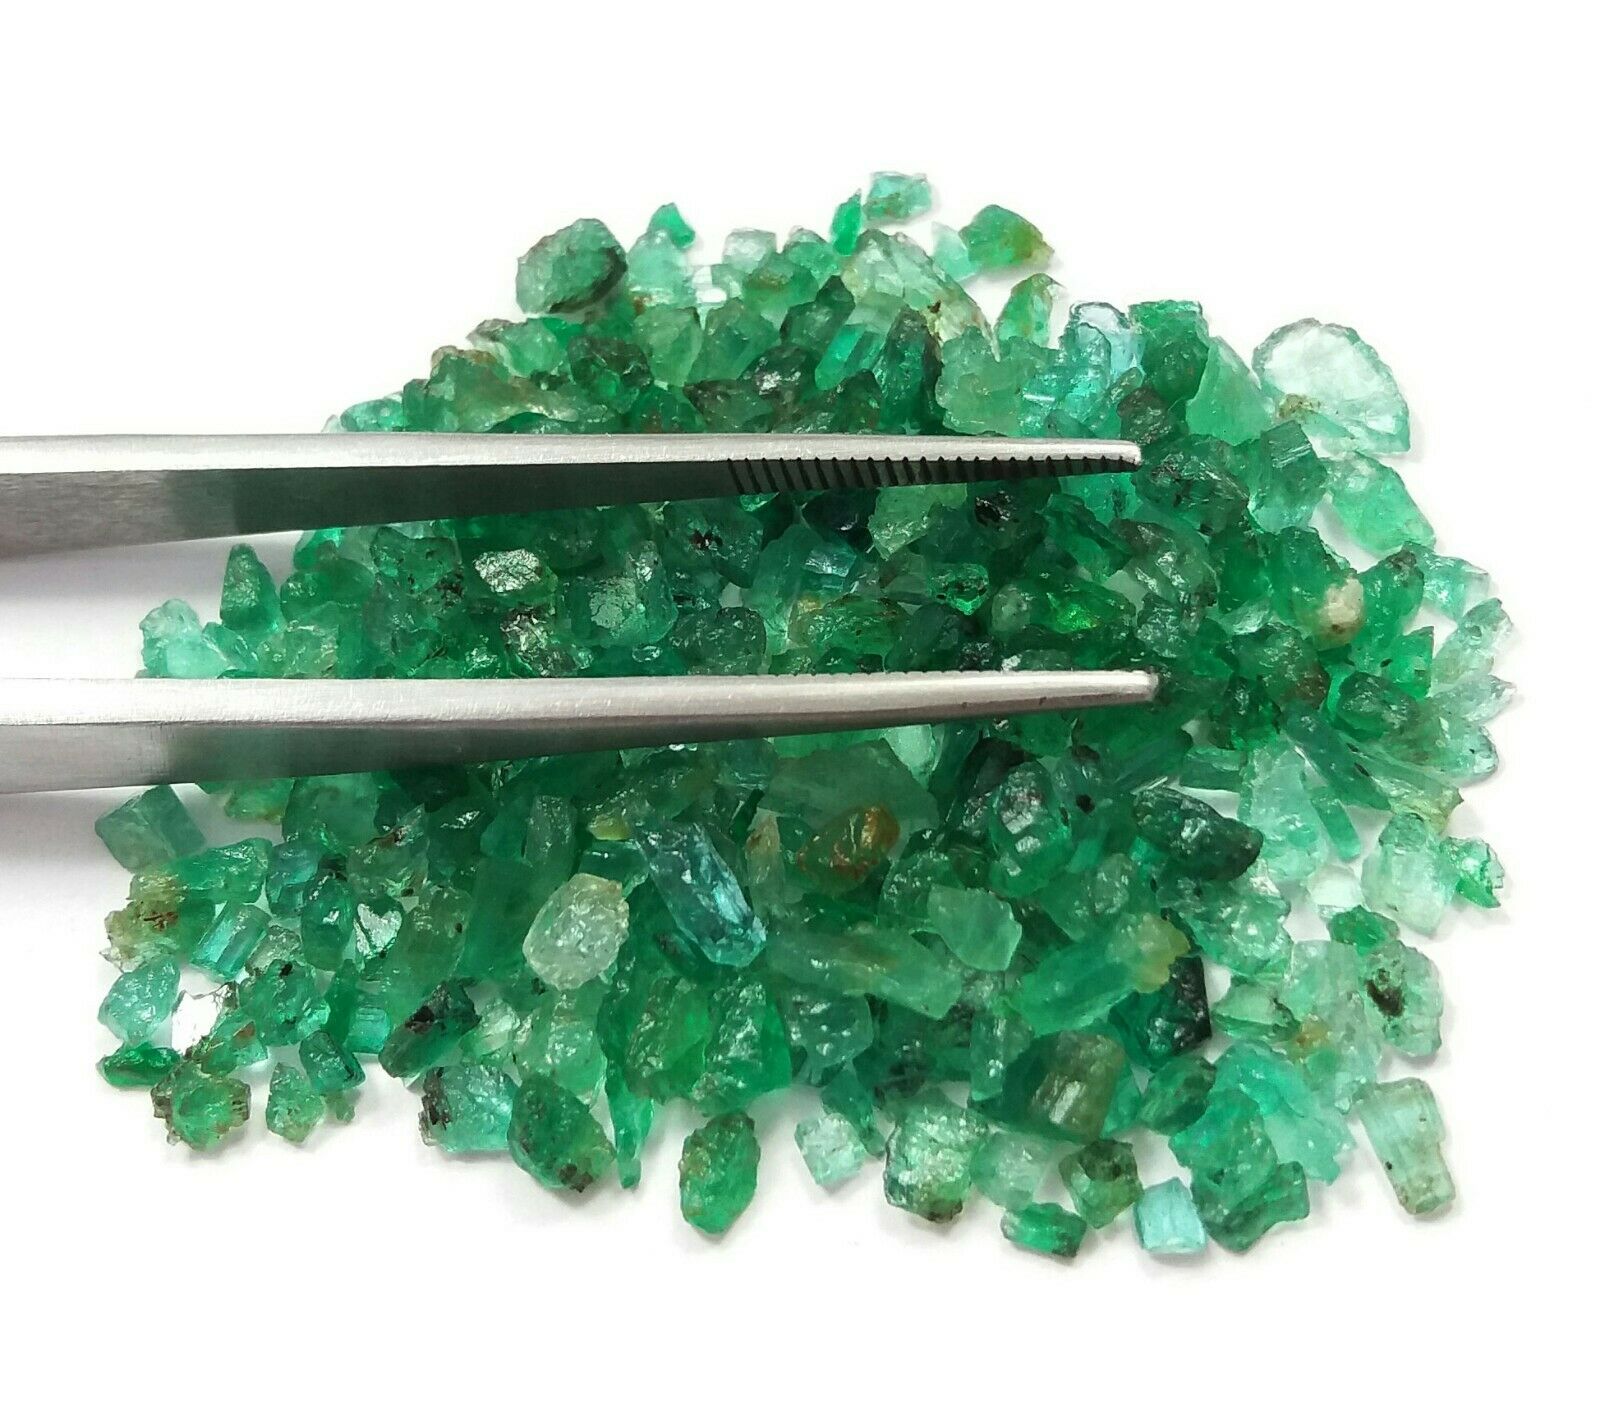 15 Ct Natural Zambia Emerald Earth Mined Rich Green Rough Lot Top Quality Loose